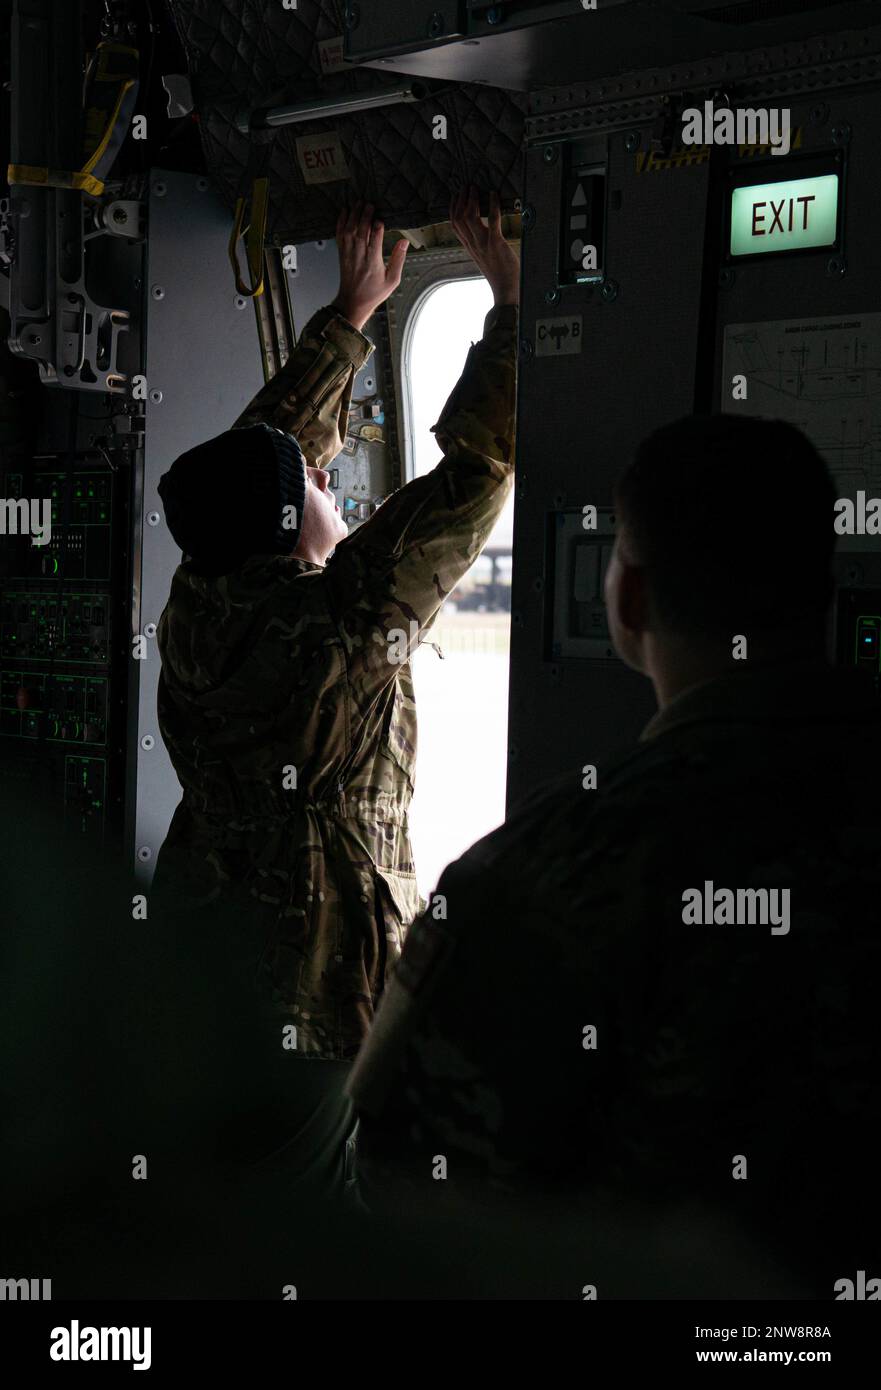 Royal air force Sgt. Tom Goulden, No. 70 Squadron air loadmaster, demonstrates how to open the exit door of a RAF Atlas C.1 A400M aircraft to U.S. service members at Ramstein Air Base, Germany, Jan. 11, 2023. The RAF teamed up with the 86th Aeromedical Evacuation Squadron for interoperability training. Stock Photo